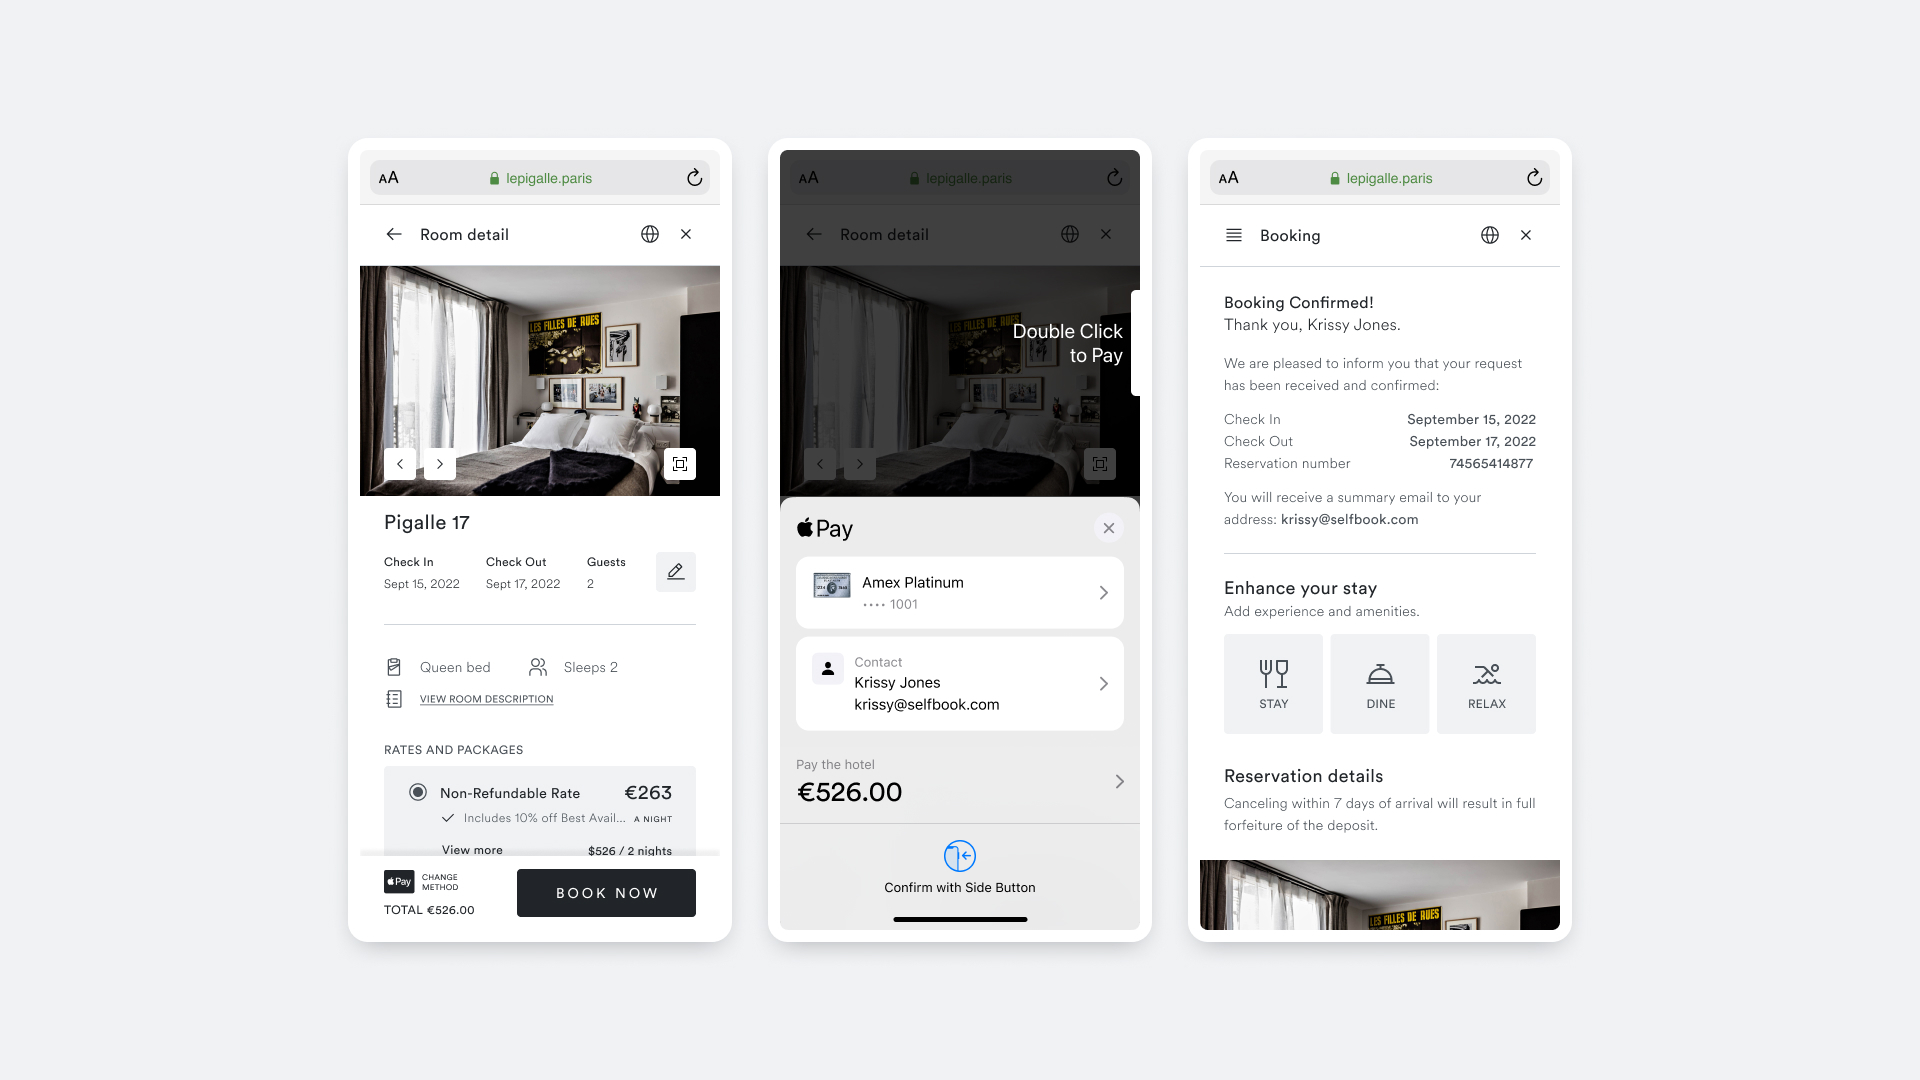 Selfbook's smooth checkout flow allows users to easily and safely book and customize reservations while helping hotels increase direct bookings and revenue